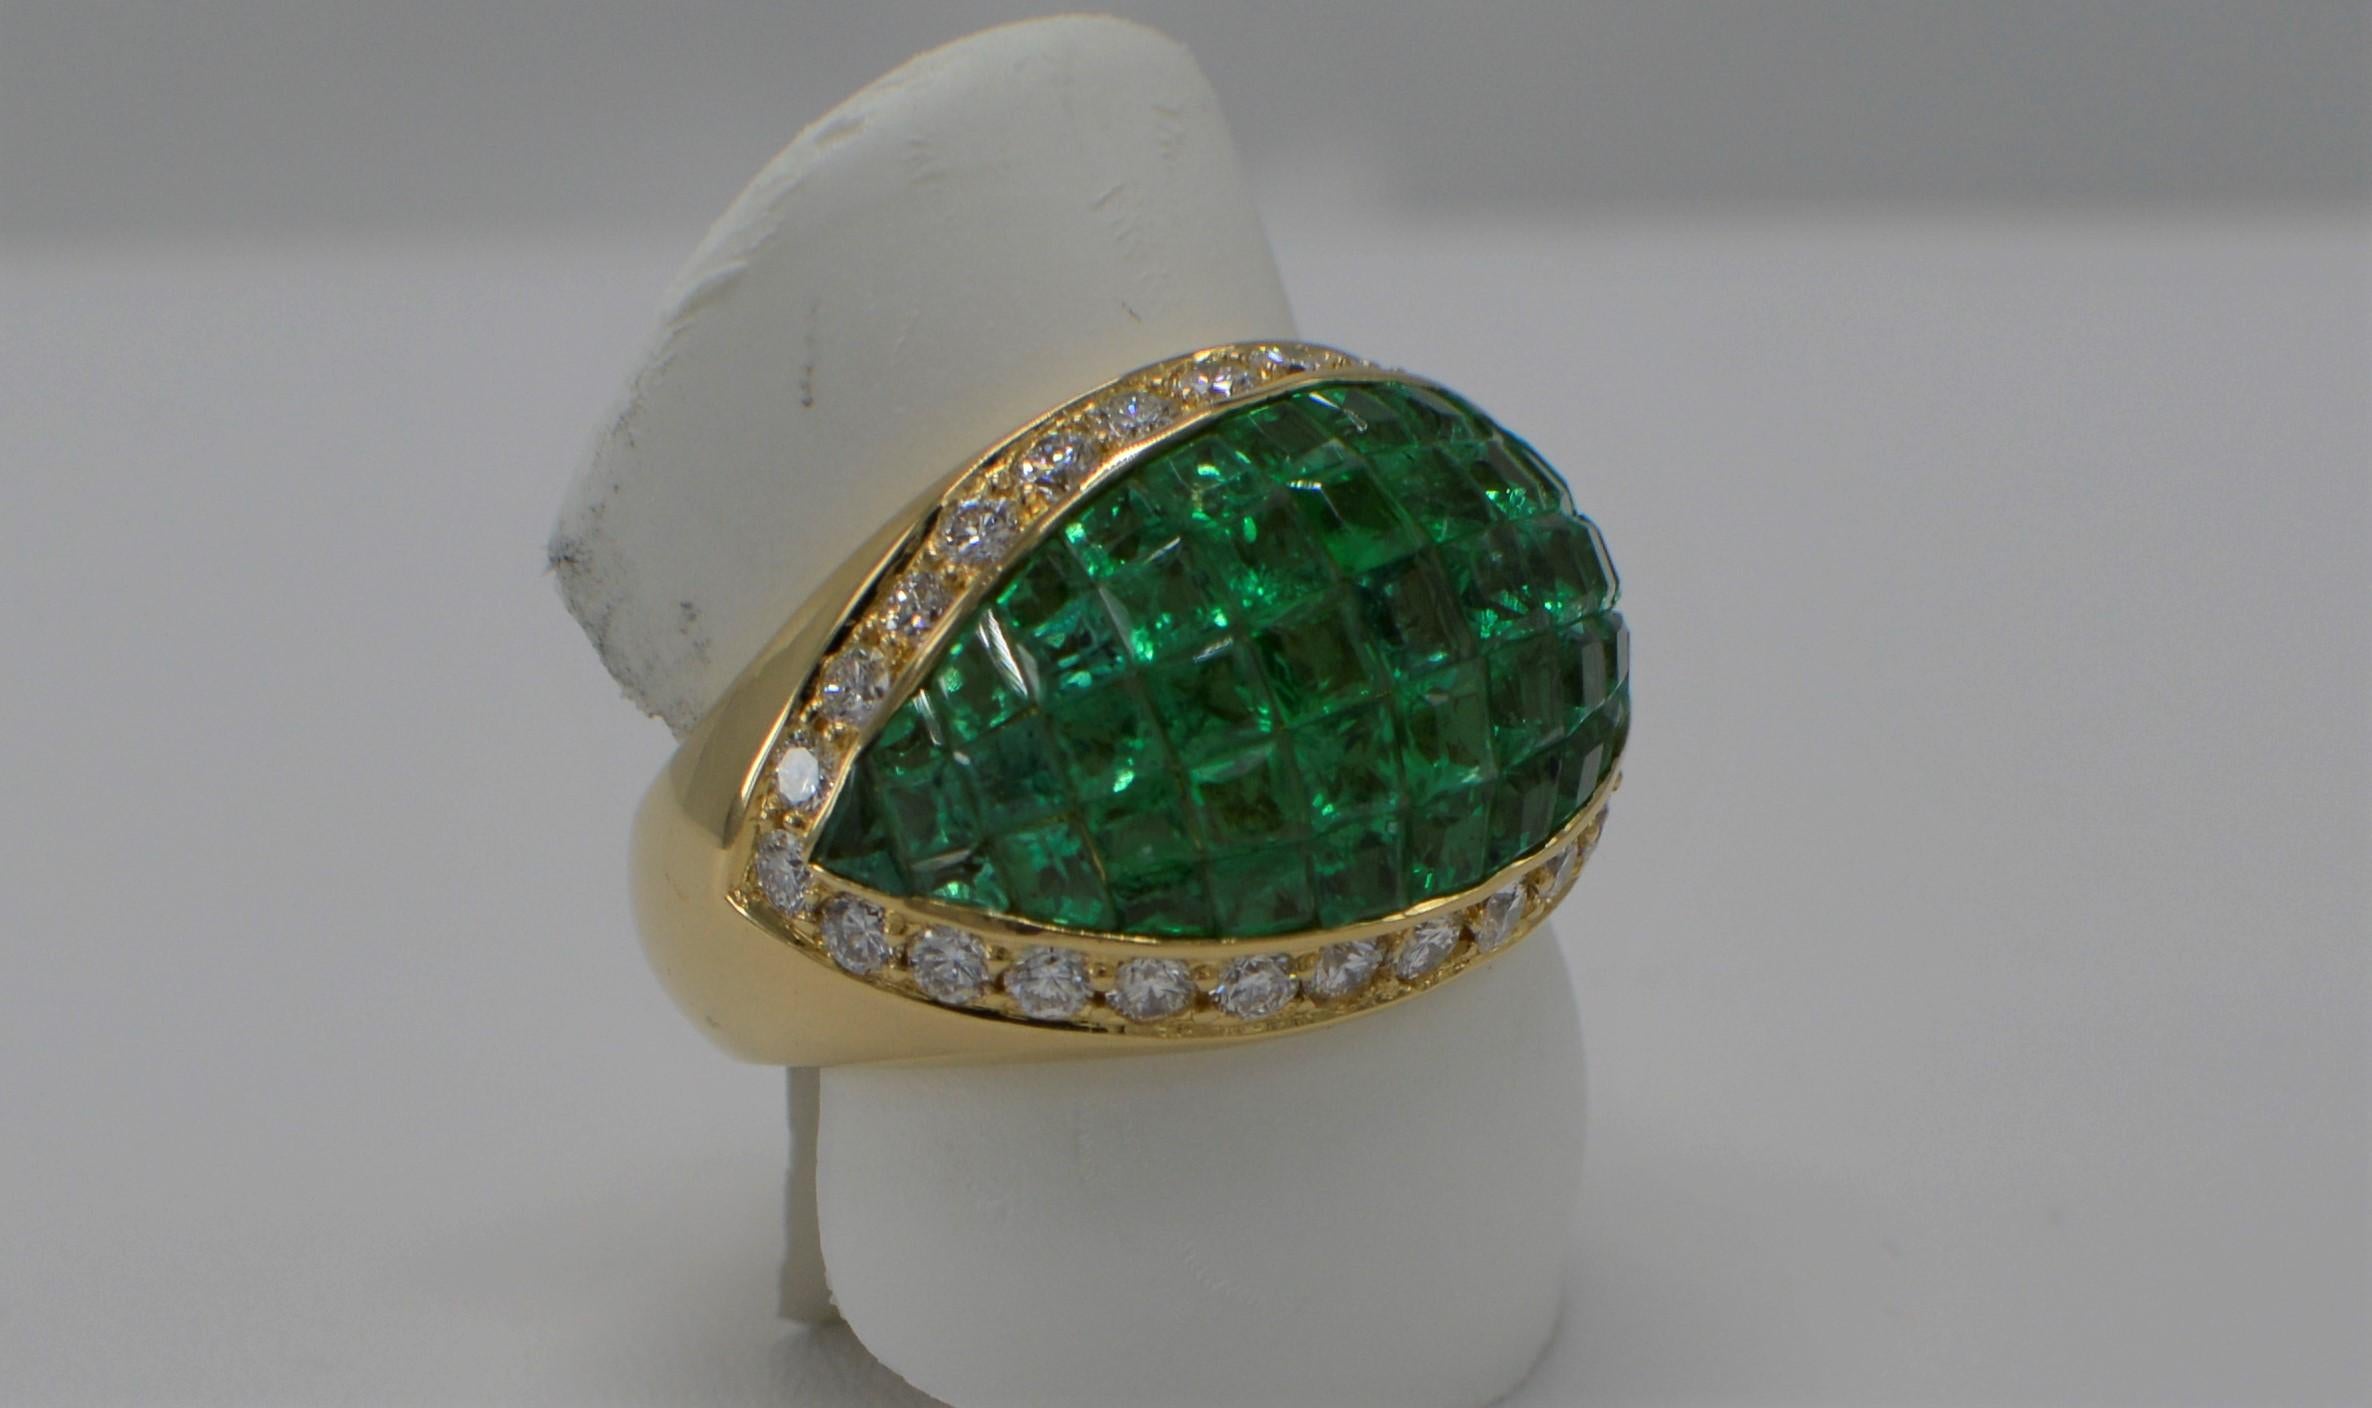 Impressive Emerald Dome Ring With Diamonds in invisible settings
Total Emeralds 6.0 carat - very nice green AAA
Total Diamonds 1.0 carat GH-VS
18k Yellow Gold  12.2 grams.
Finger size 6
All stones are natural - none Treated 

